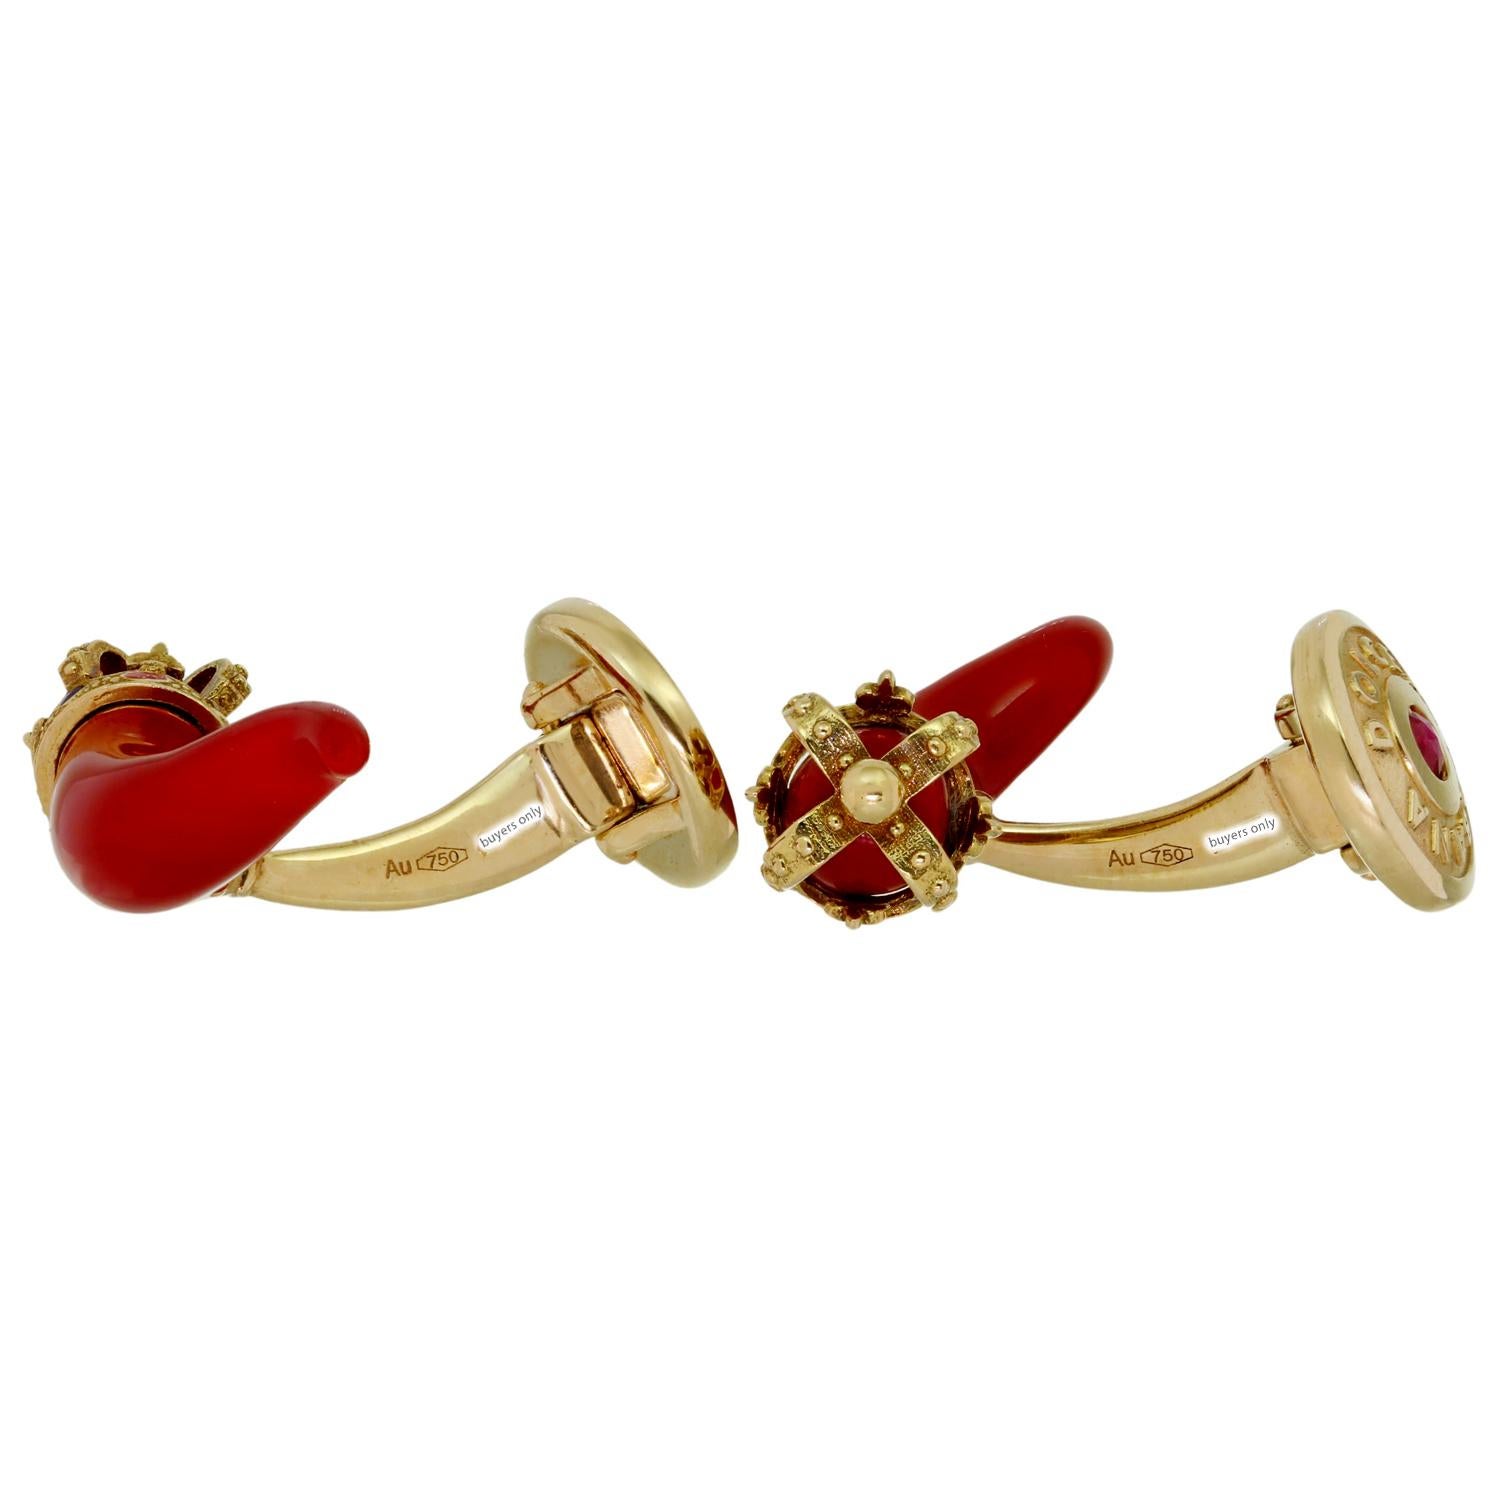 DOLCE & GABBANA Horn Amulet Crown Red Enamel Ruby 18k Gold Small Cufflinks  In Excellent Condition For Sale In New York, NY